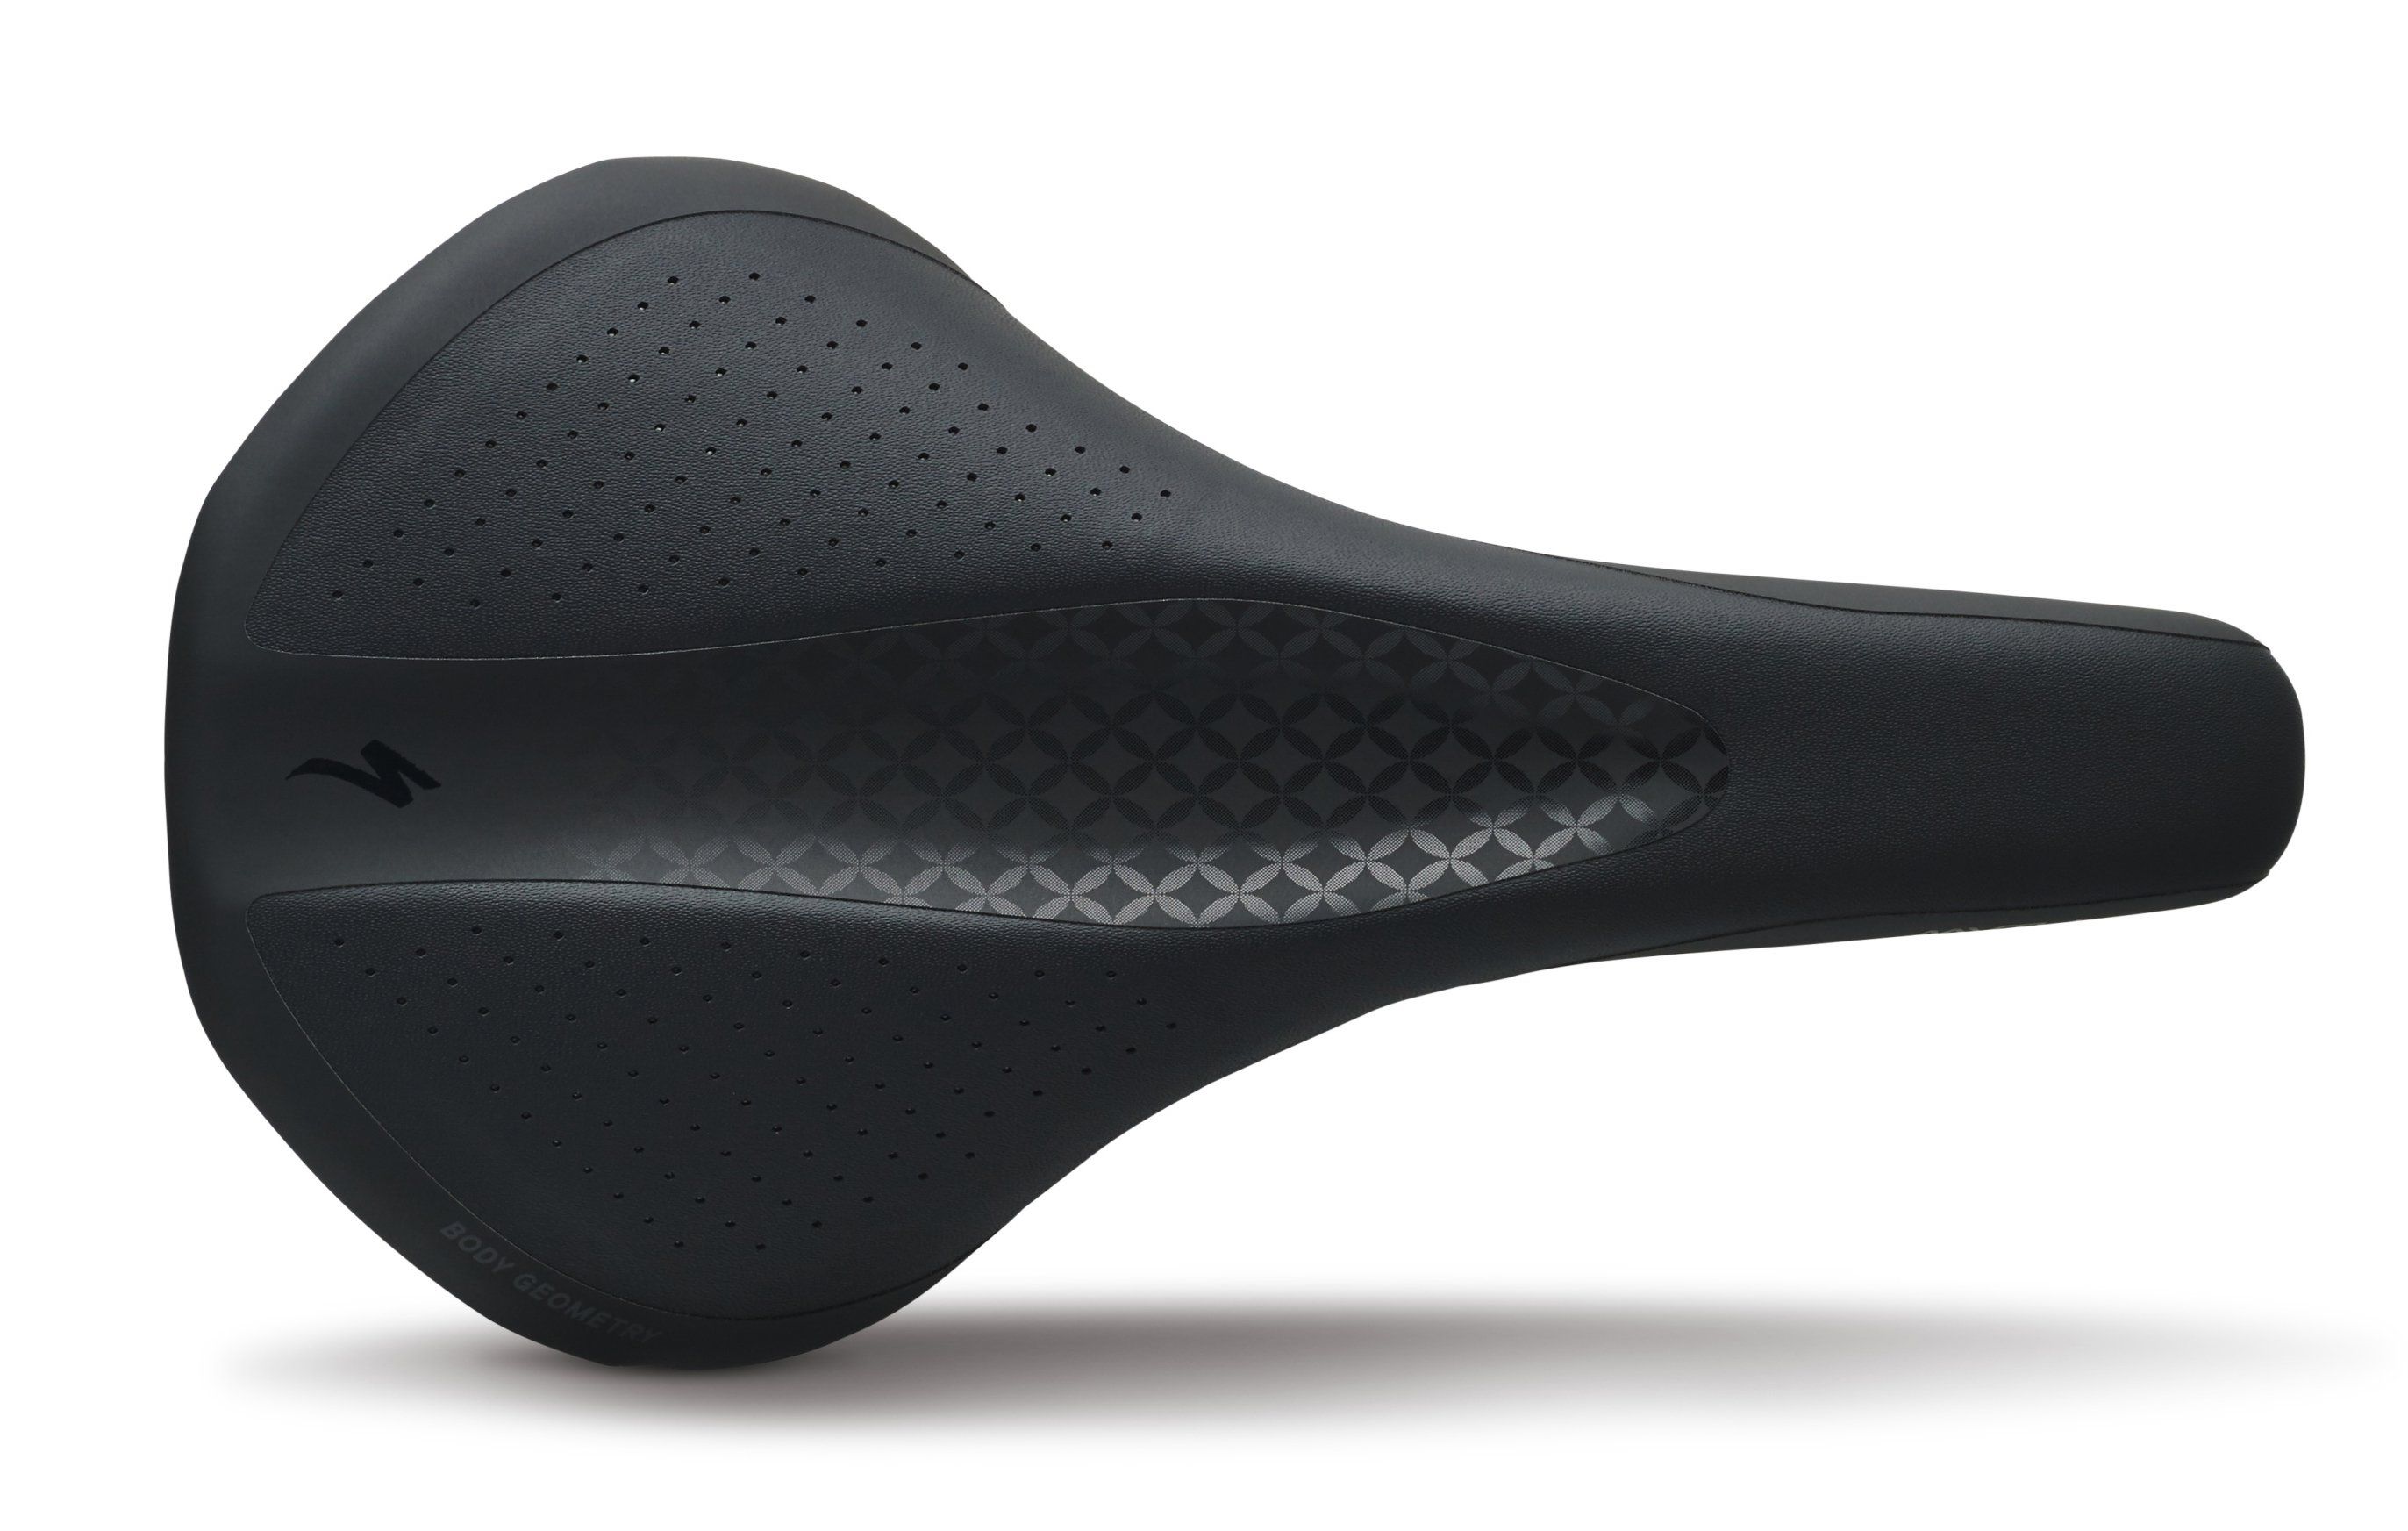 bicycle seat for women